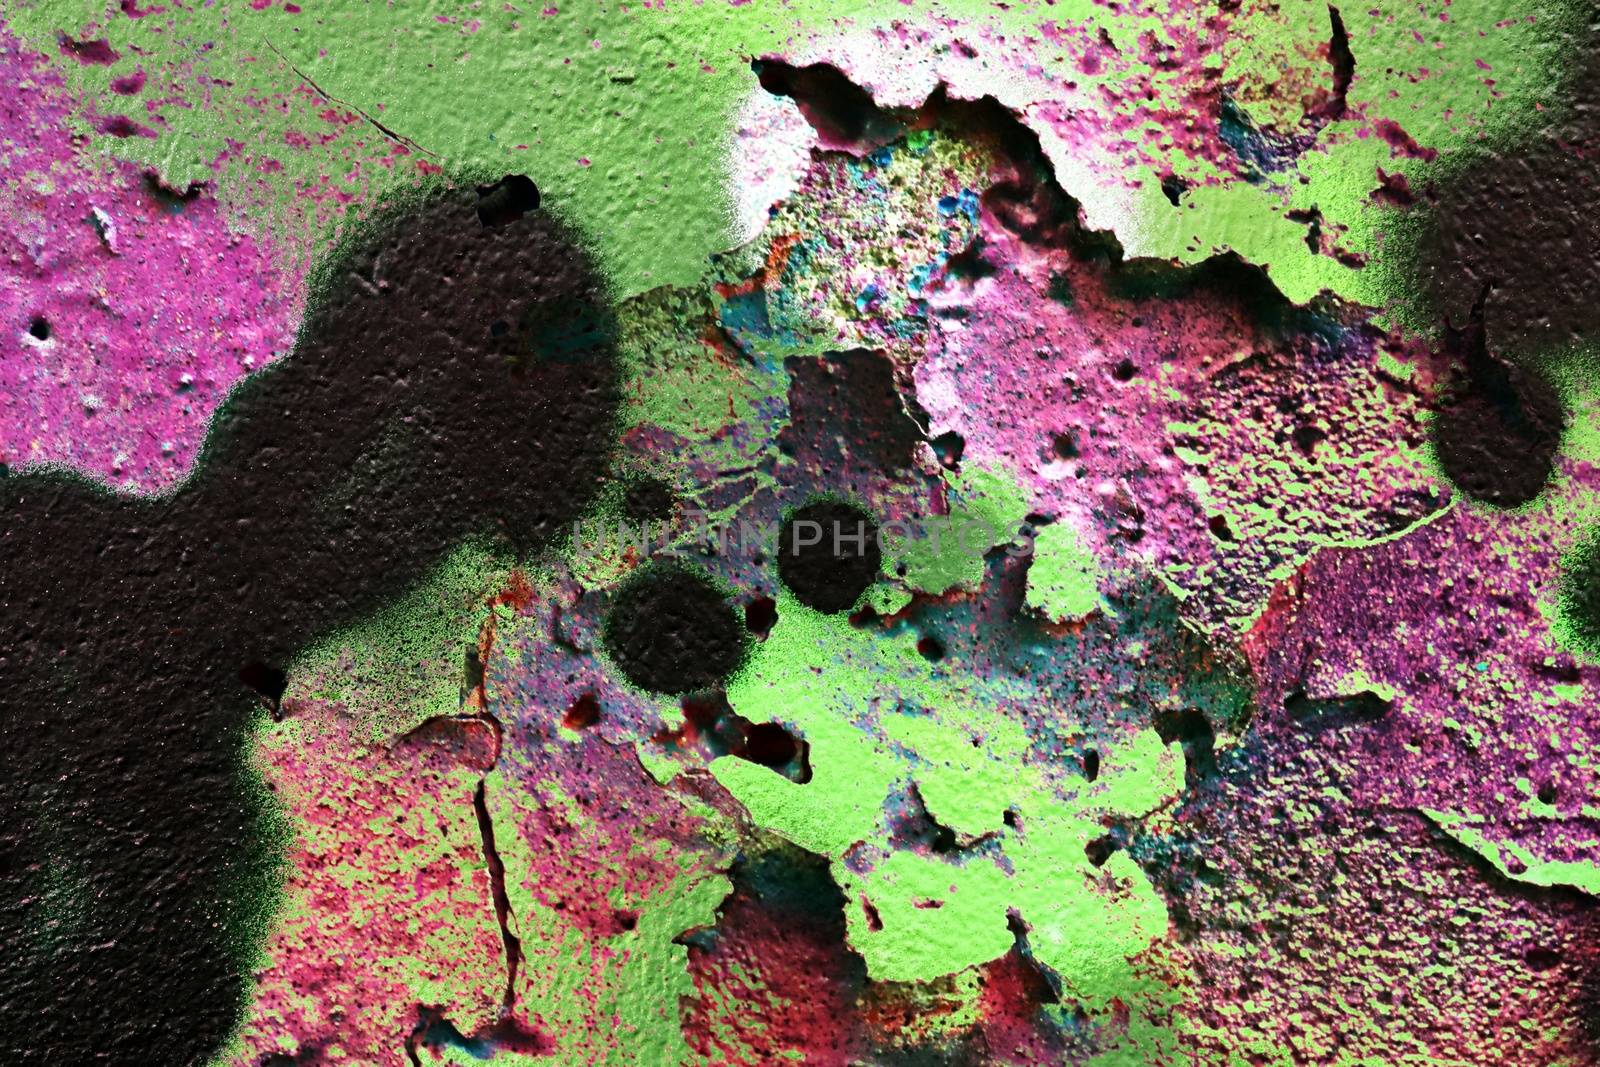 Detailed and colorful close up at cracked and peeling paint on c by MP_foto71